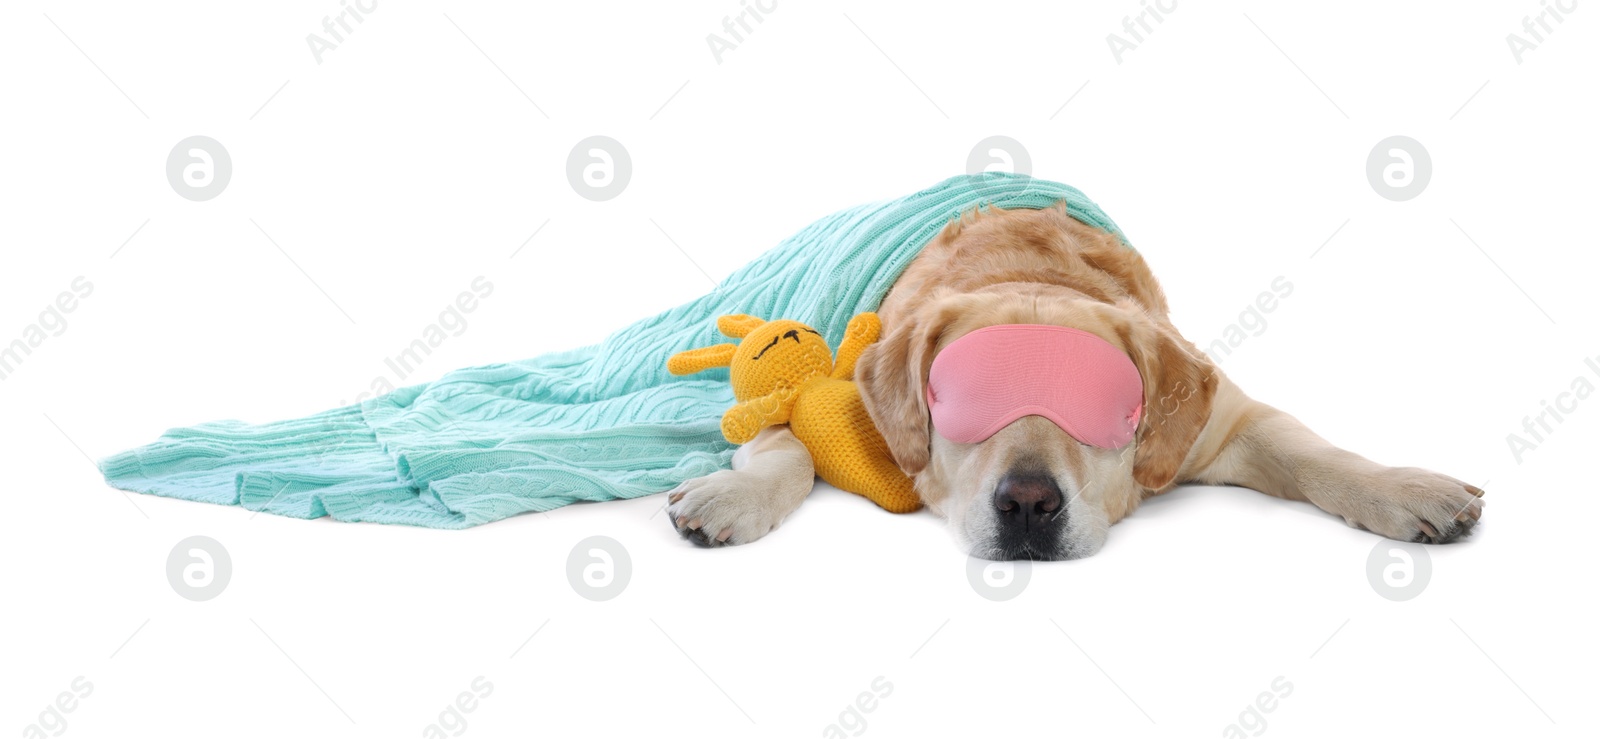 Photo of Cute Labrador Retriever with sleep mask and crocheted bunny under blanket resting on white background